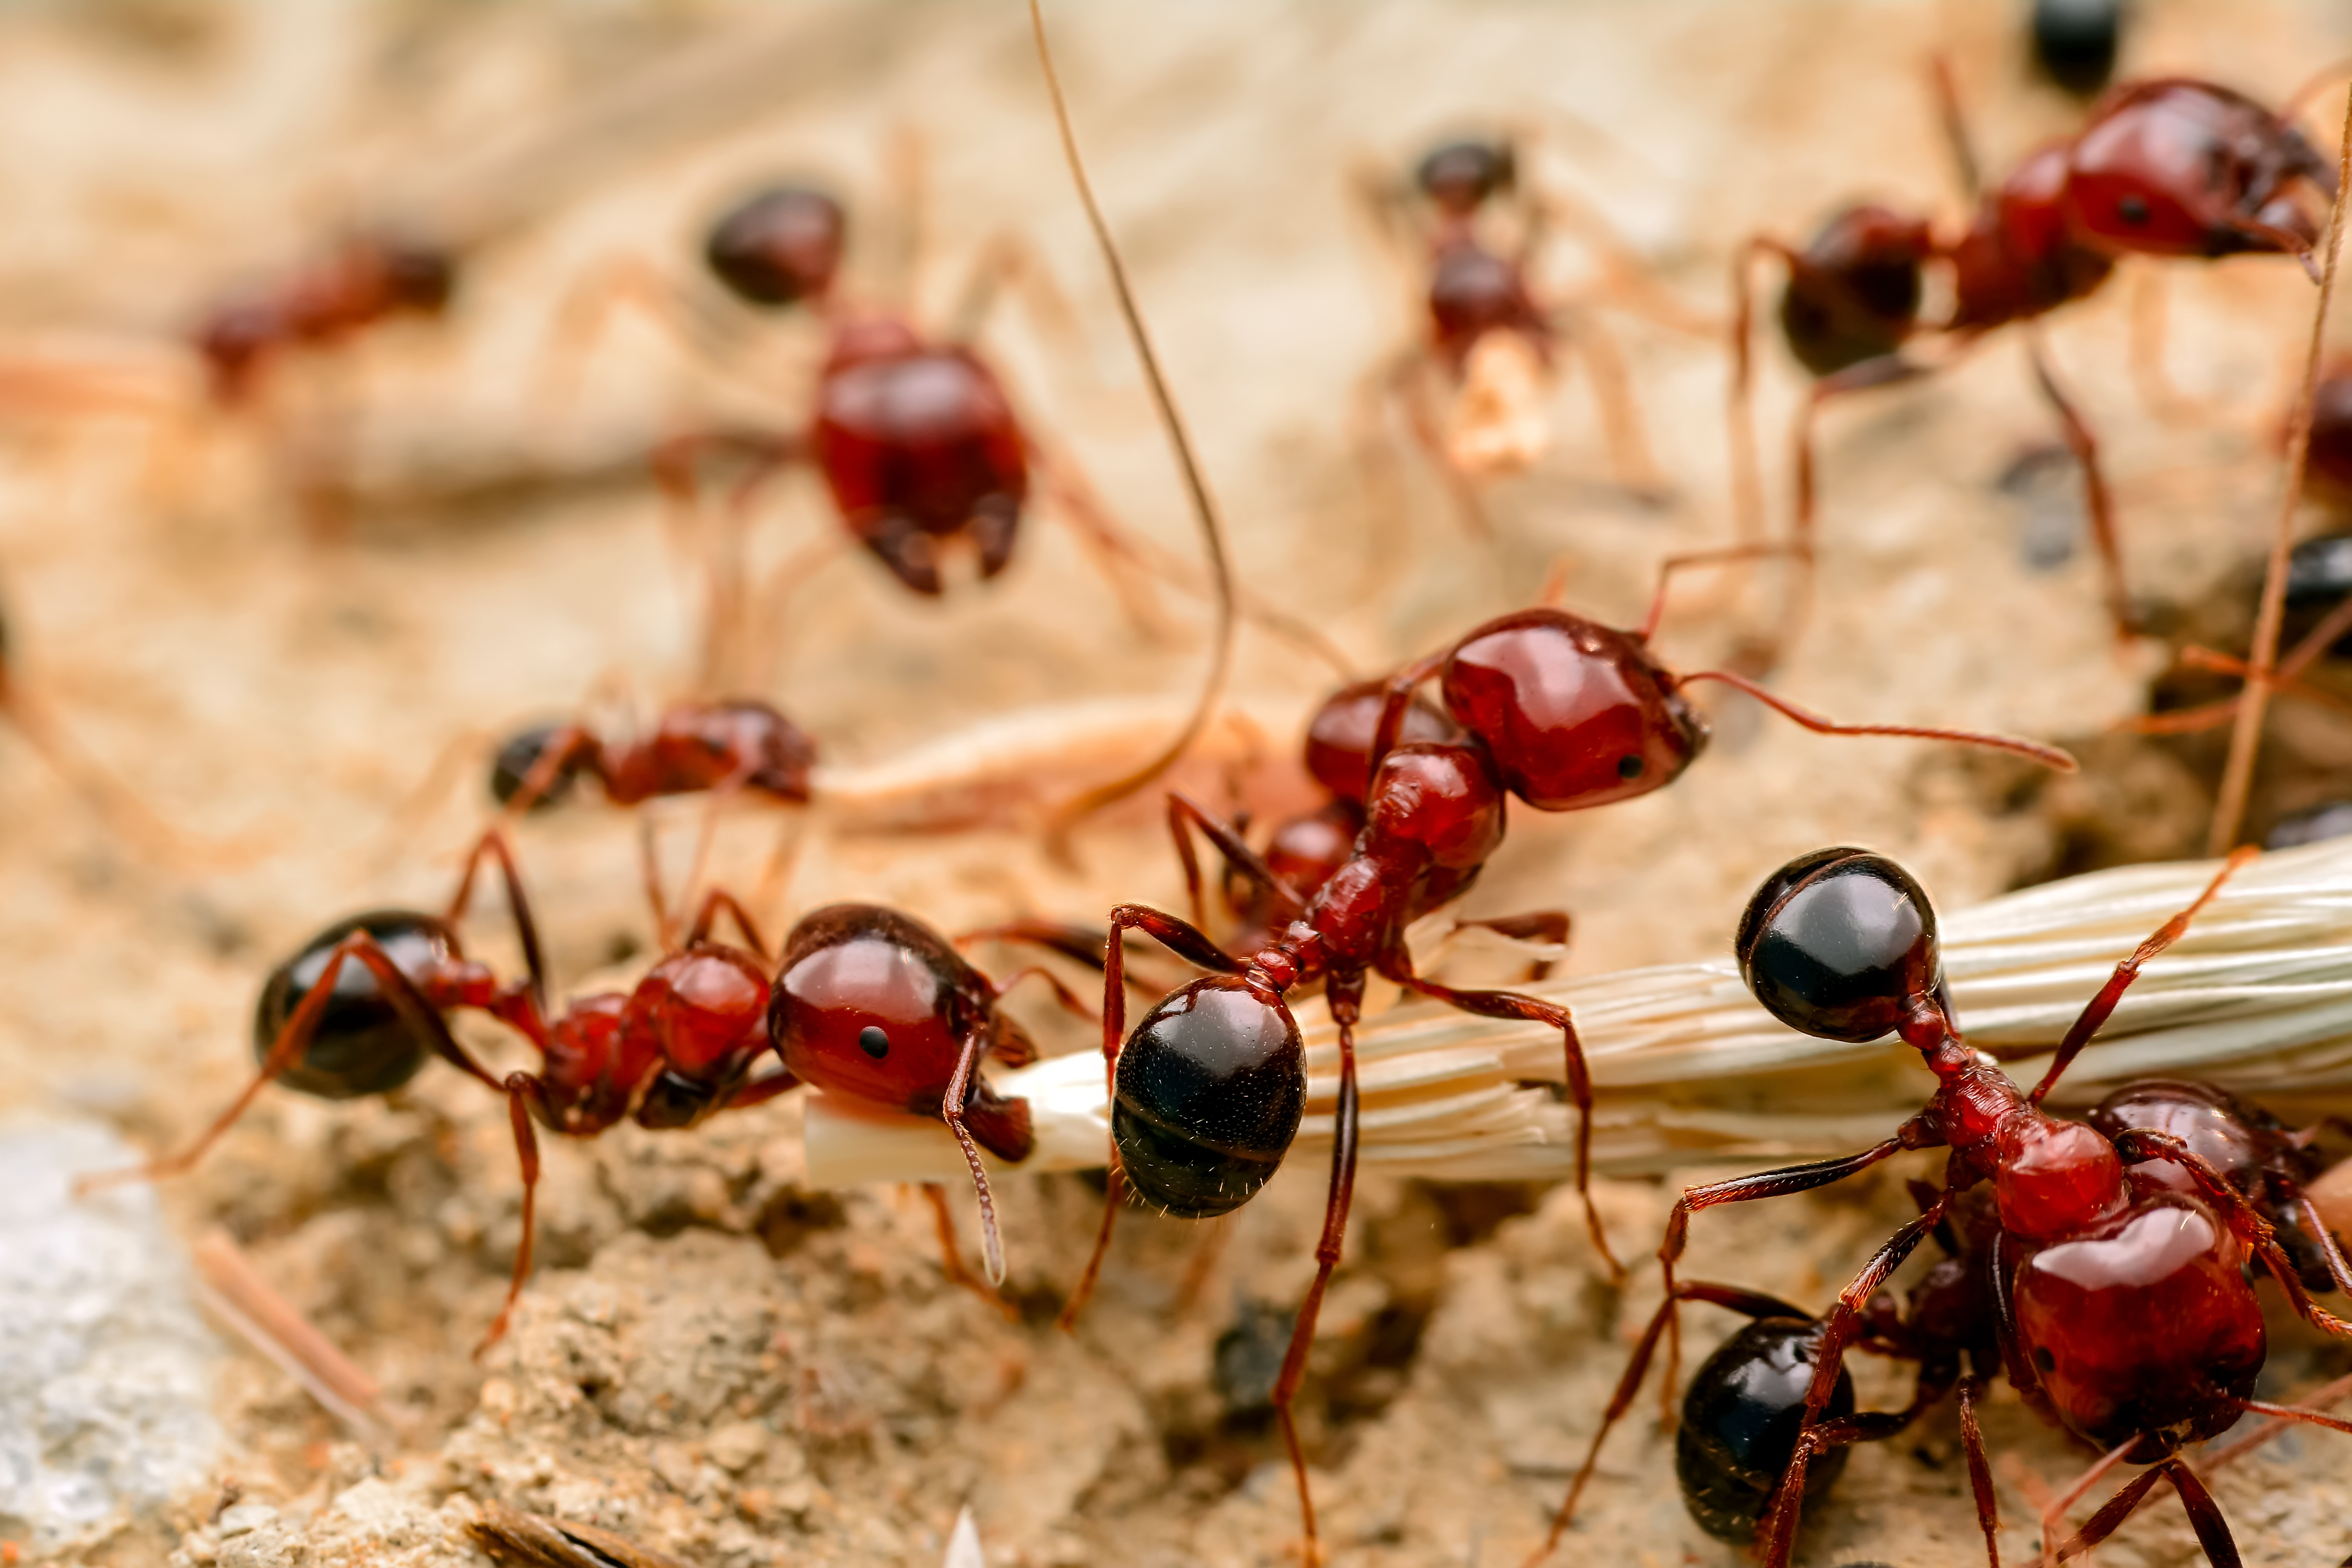 A closeup image on fire ants and their strong pinchers - learn how GGA Pest Management can help with our fire ant control in Hillsboro, TX.